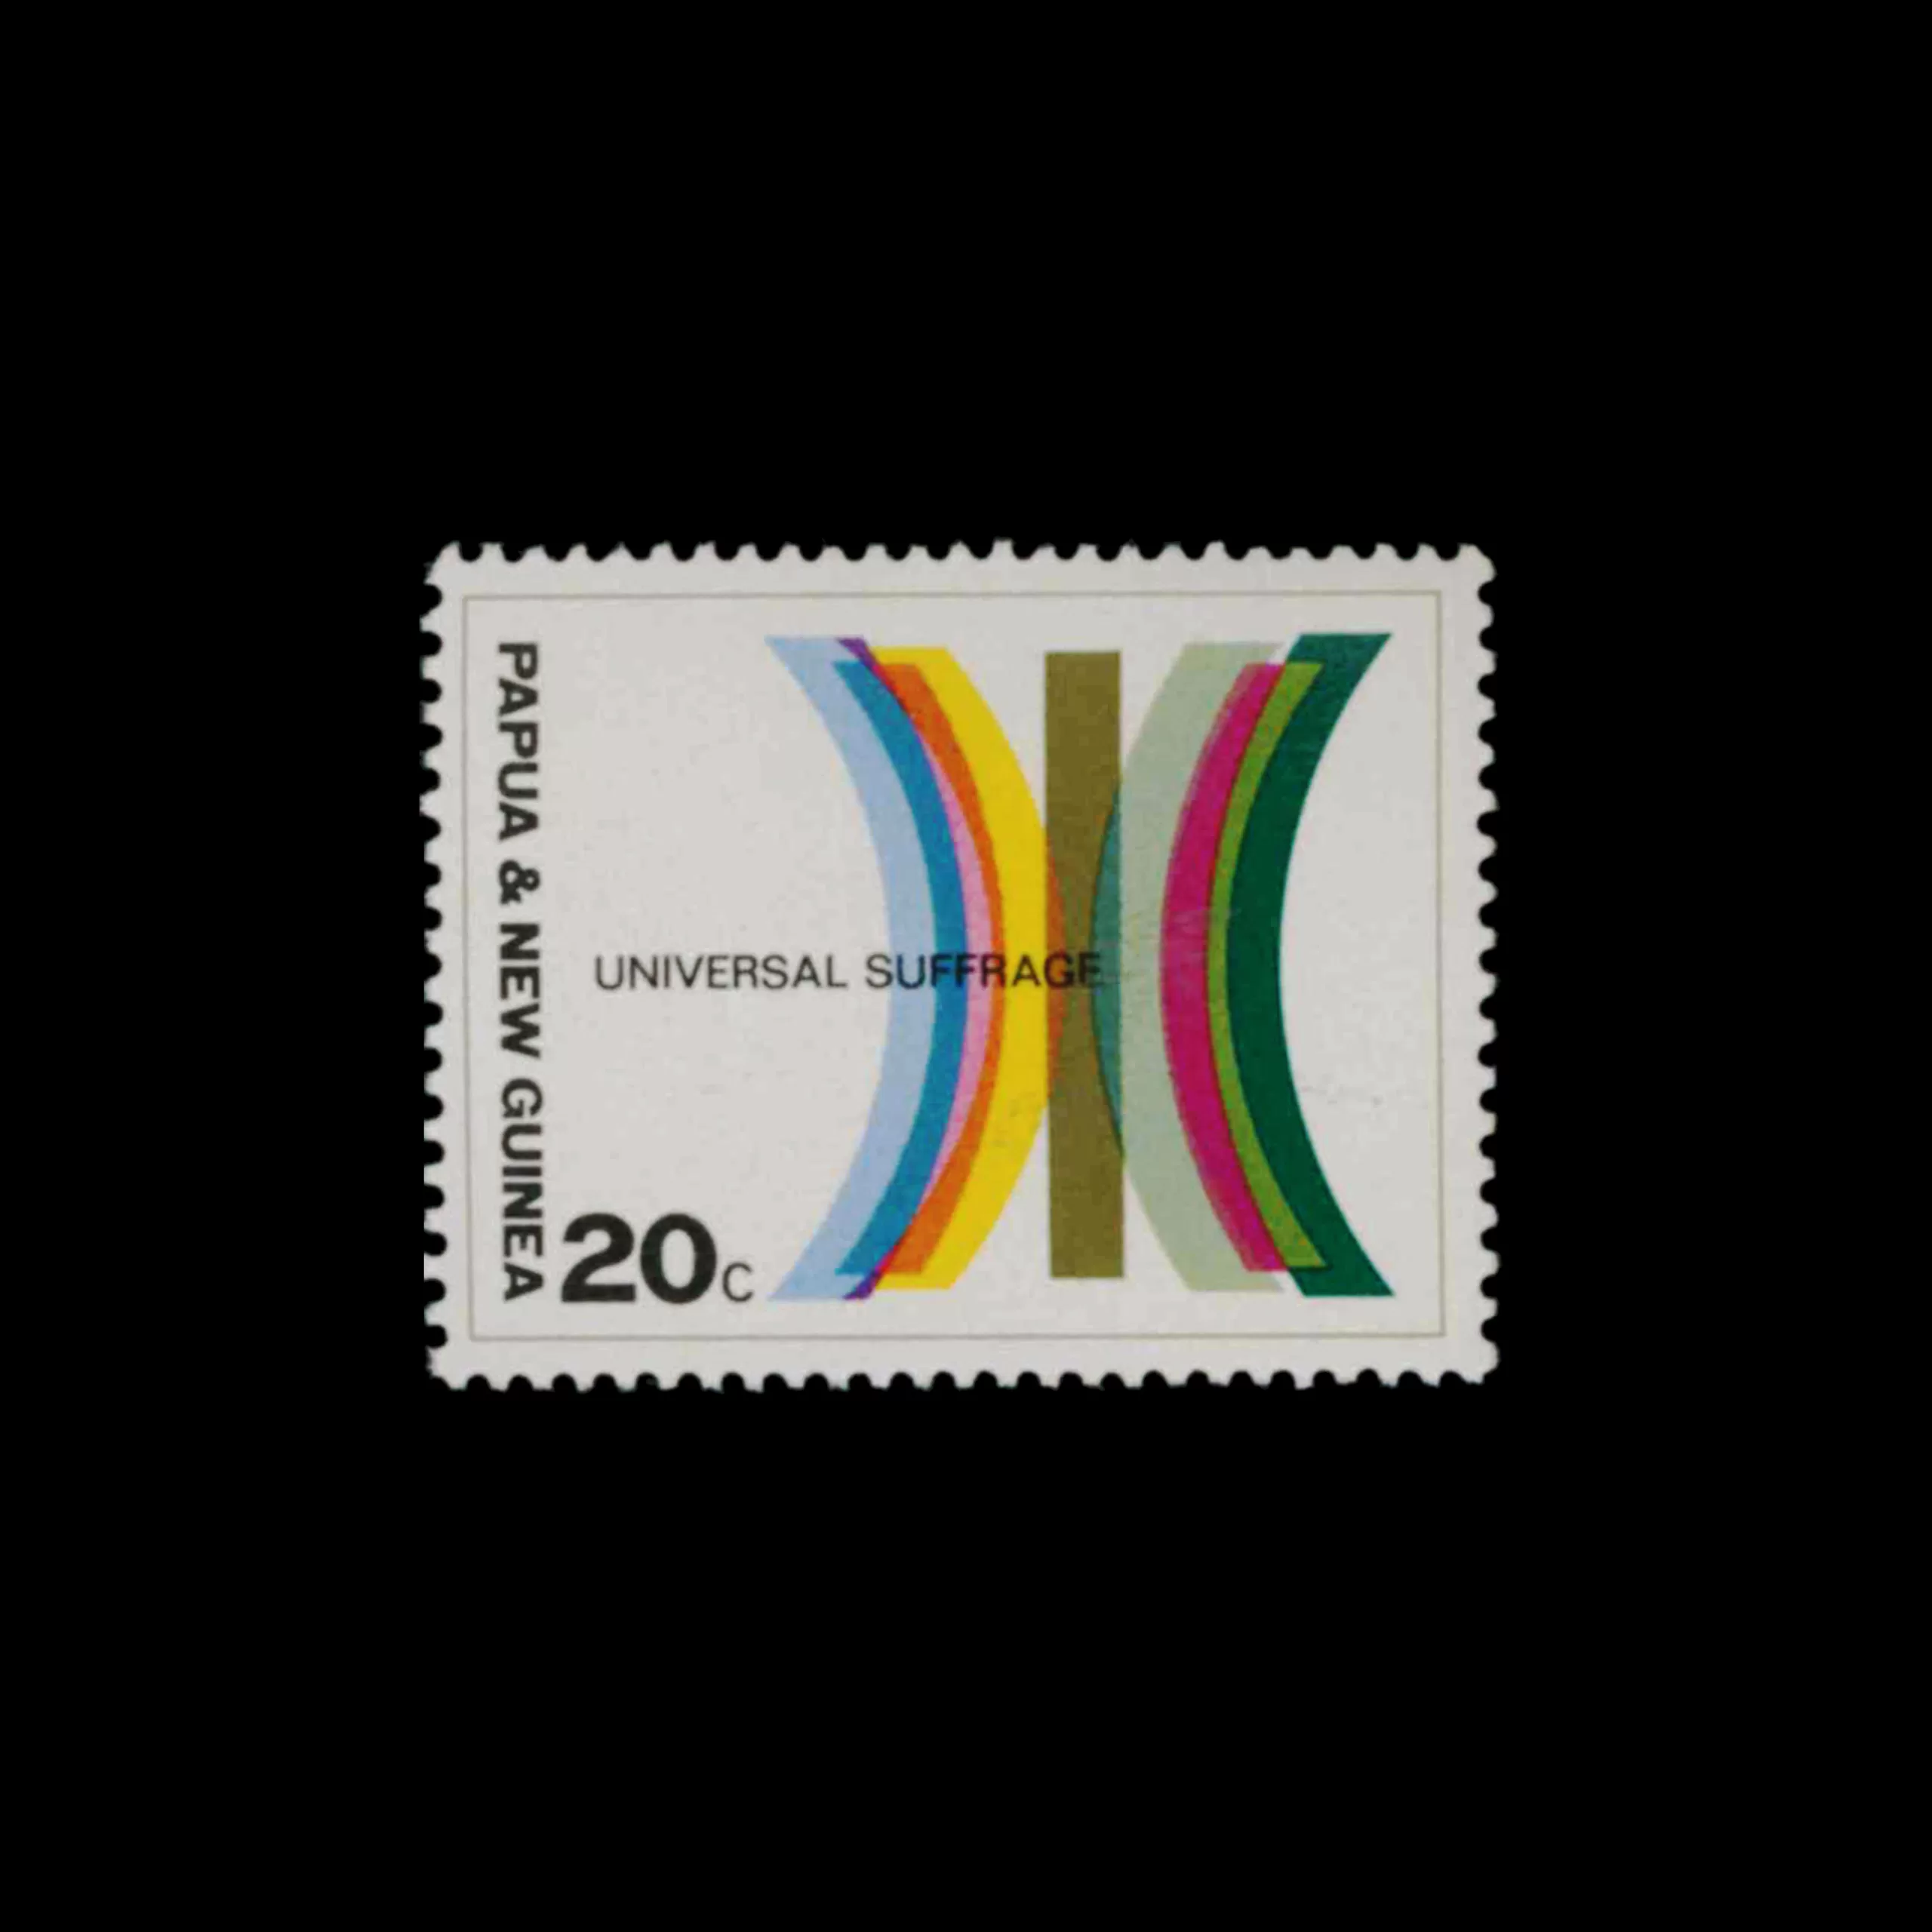 Universal Suffrage, Papua New Guinea Stamps, 1968. Designed by George Hamori